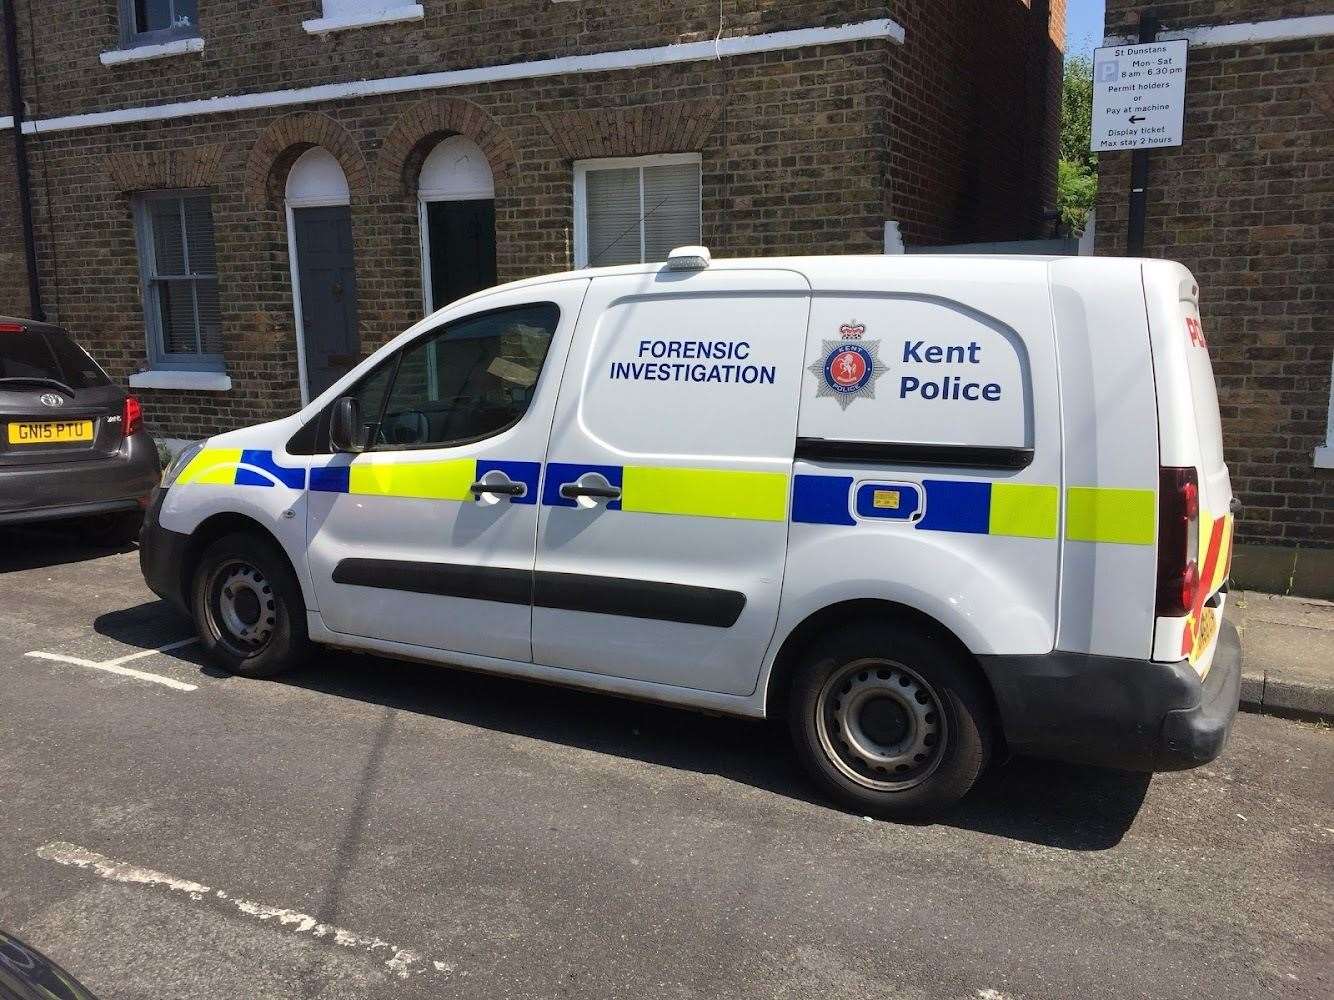 Forensics van in St Dunstans this morning